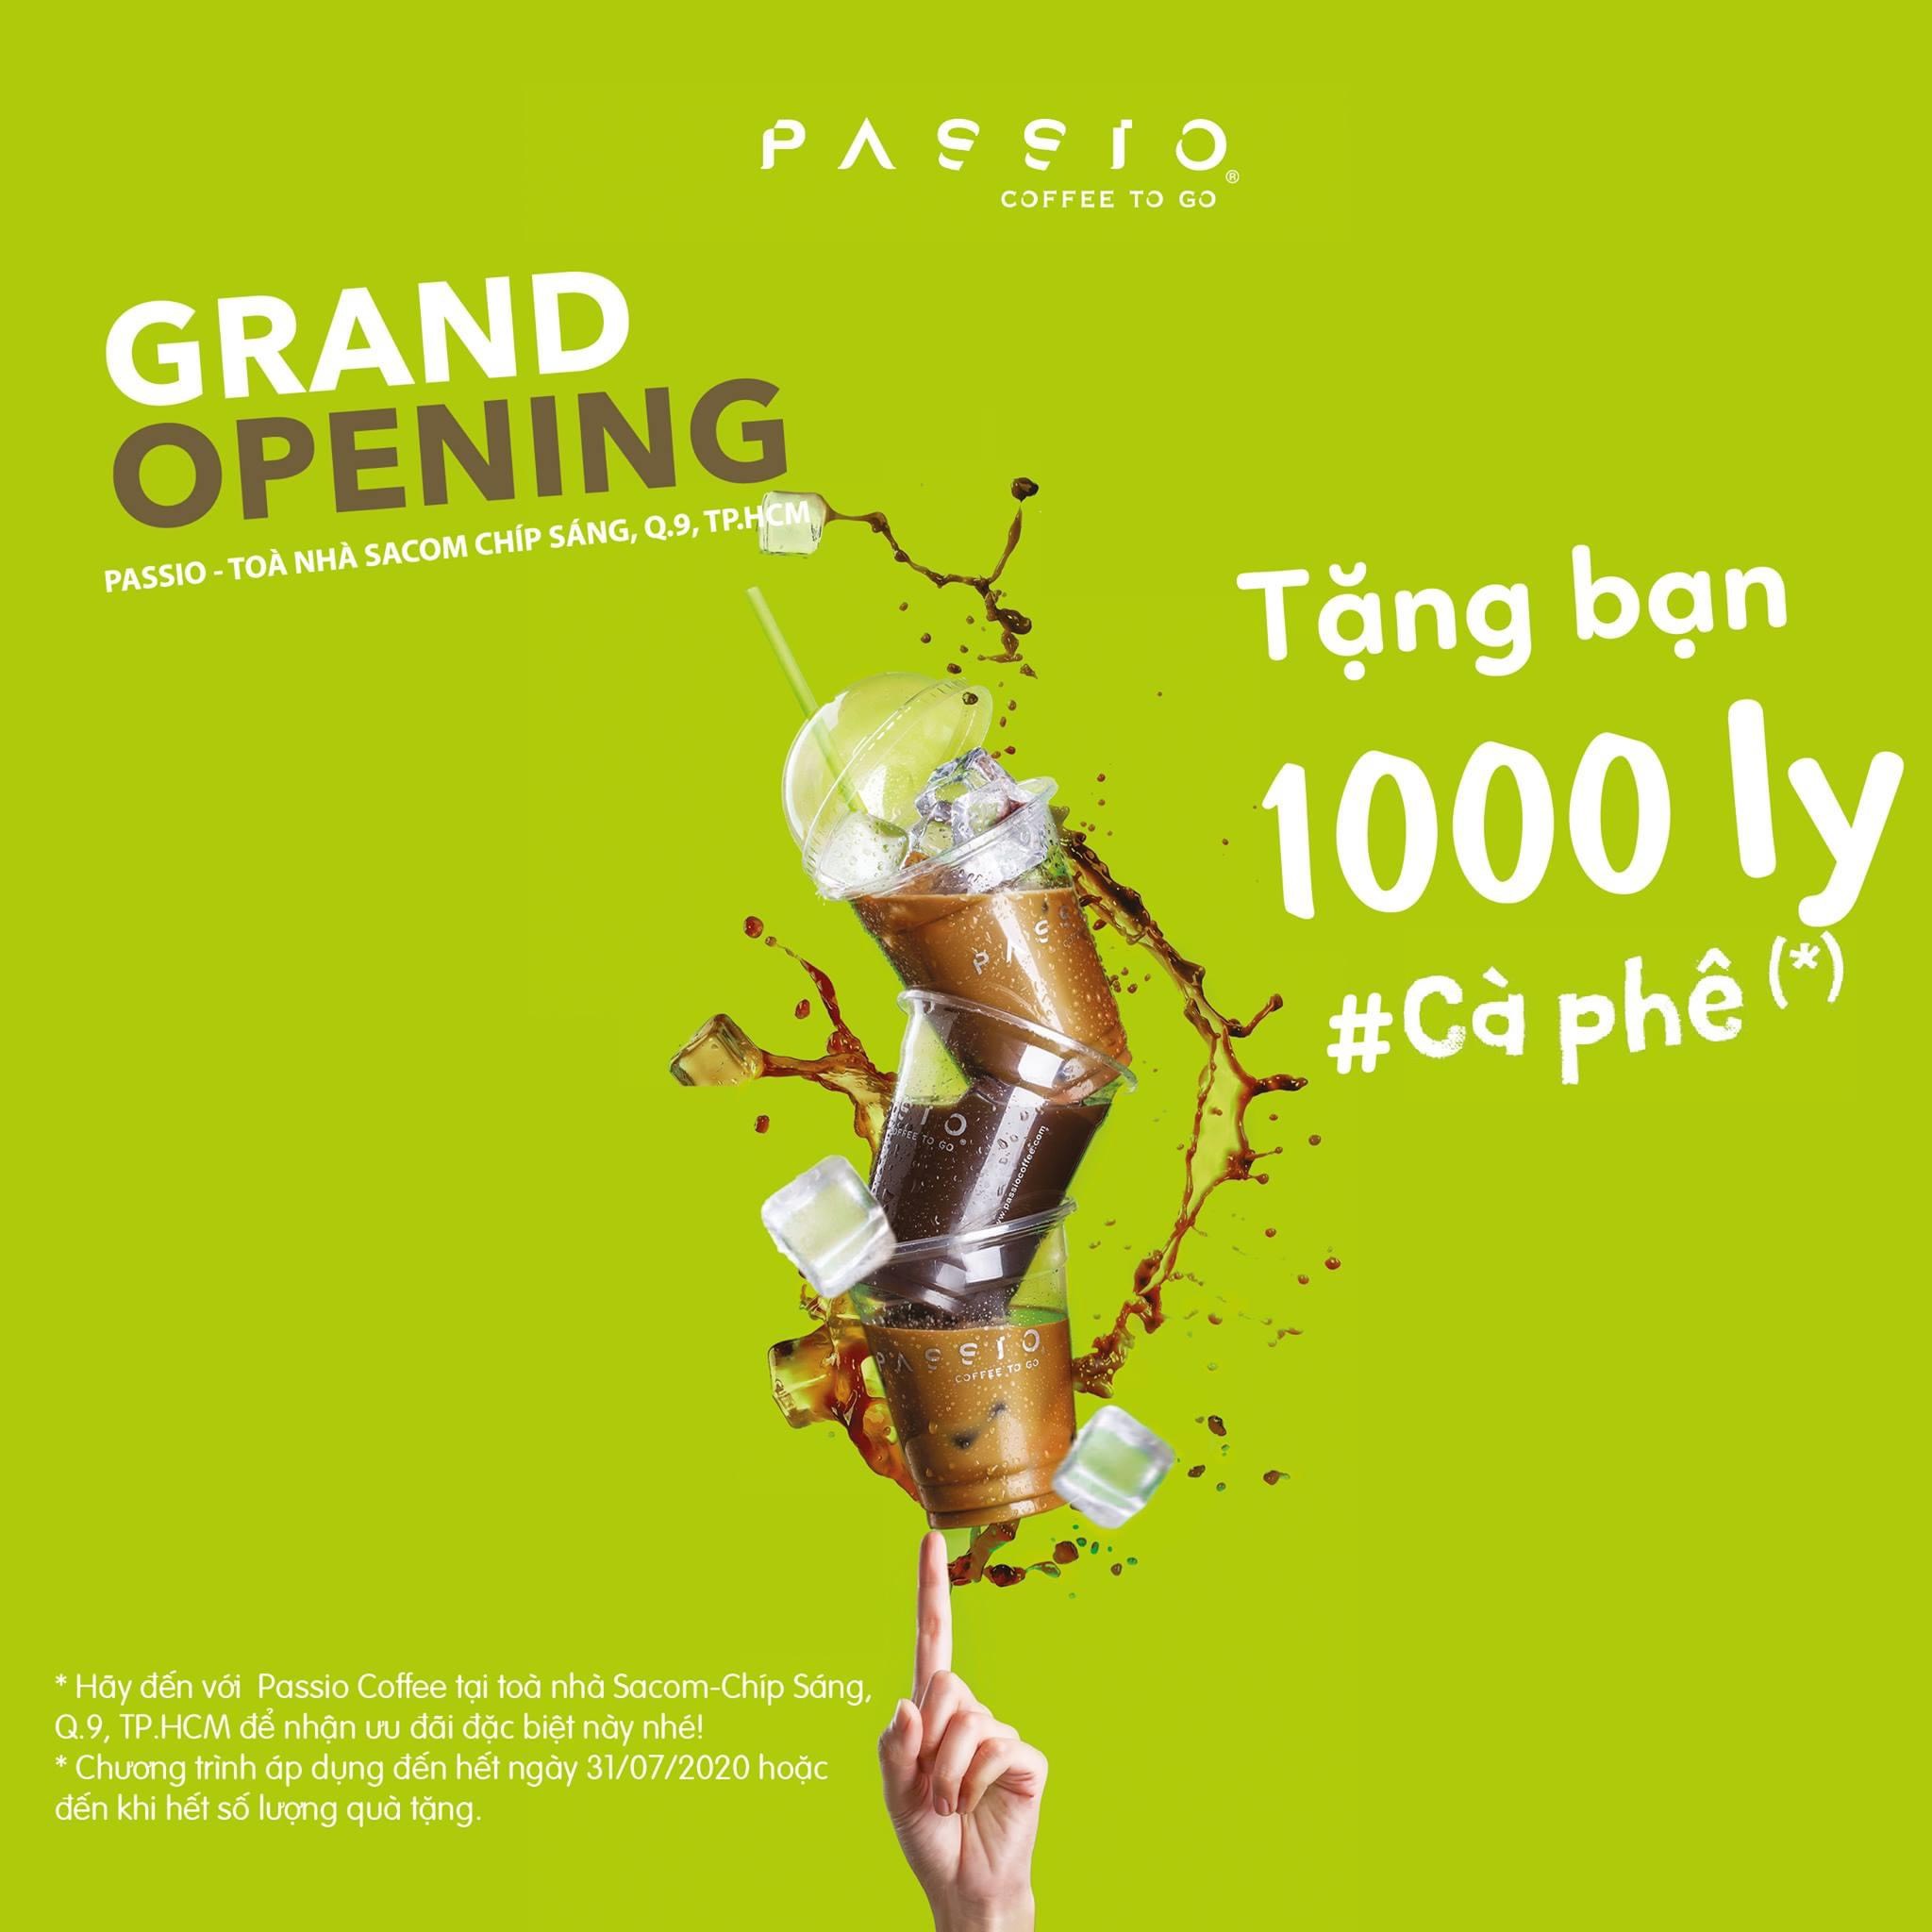 GRAND OPENING PASSIO COFFEE AT SCS BUILDING